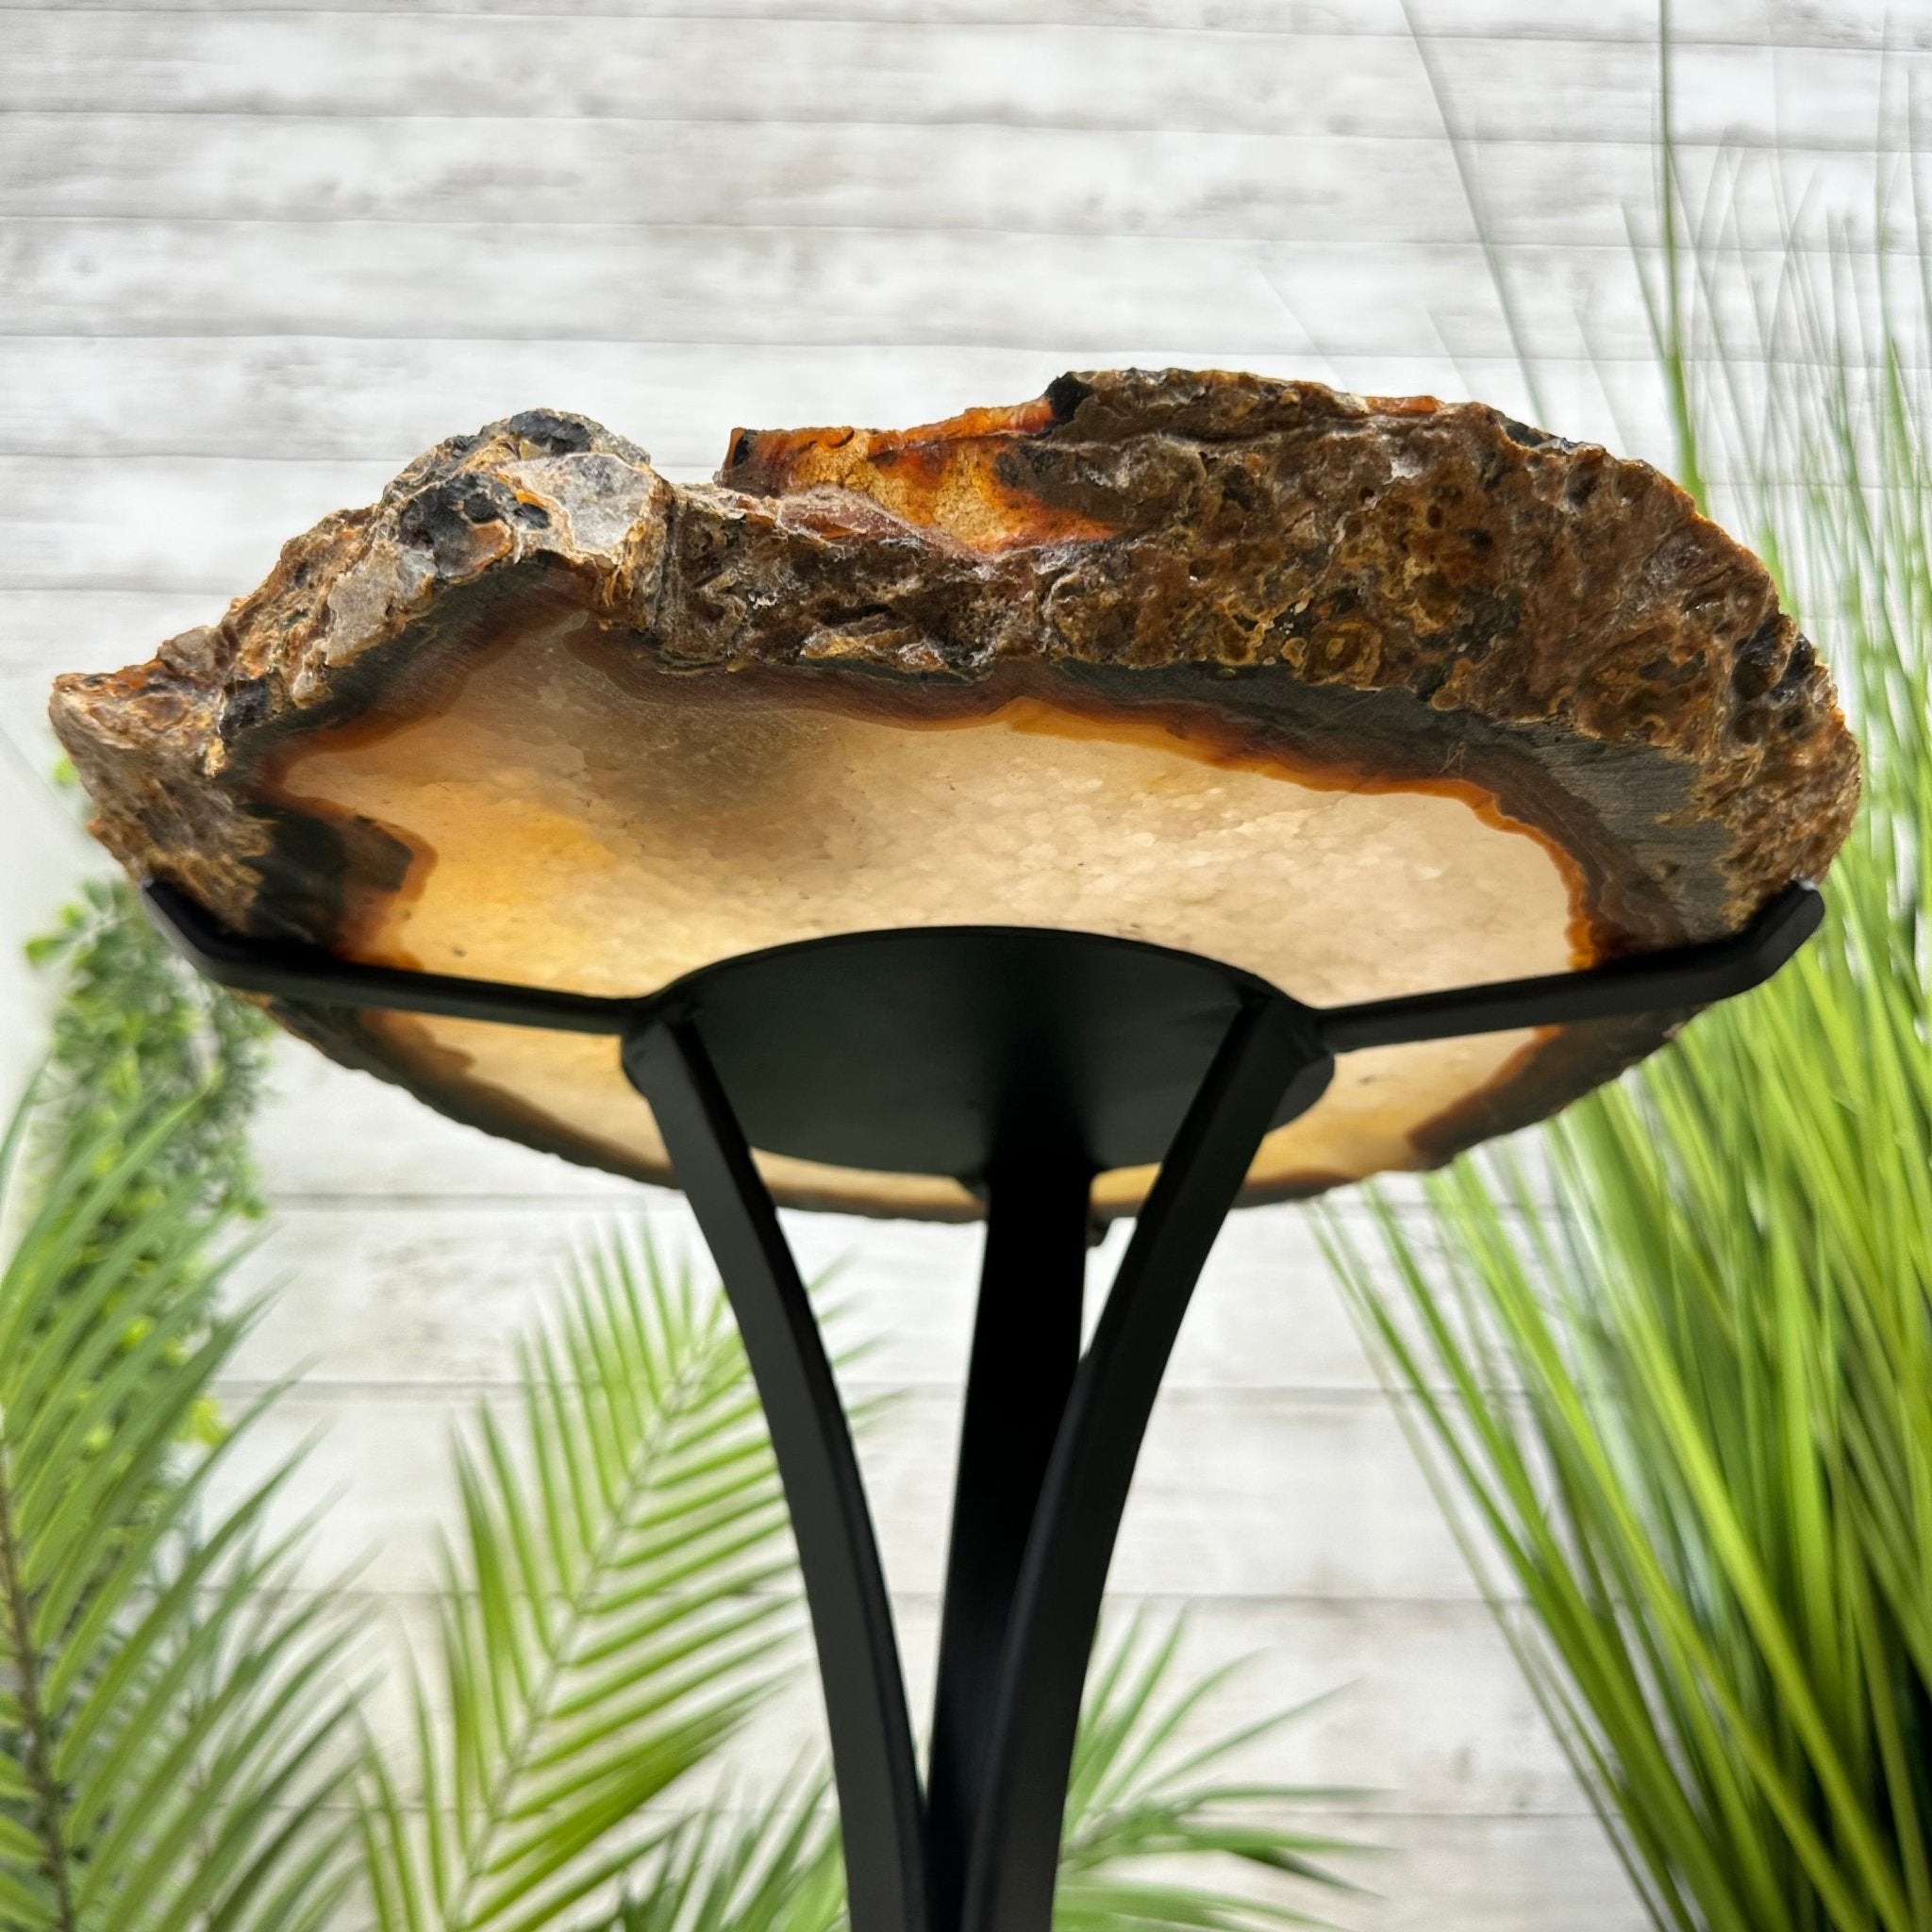 Natural Brazilian Agate Side Table on a black metal base, 22" tall #1305-0166 by Brazil Gems - Brazil GemsBrazil GemsNatural Brazilian Agate Side Table on a black metal base, 22" tall #1305-0166 by Brazil GemsTables: Side1305-0166